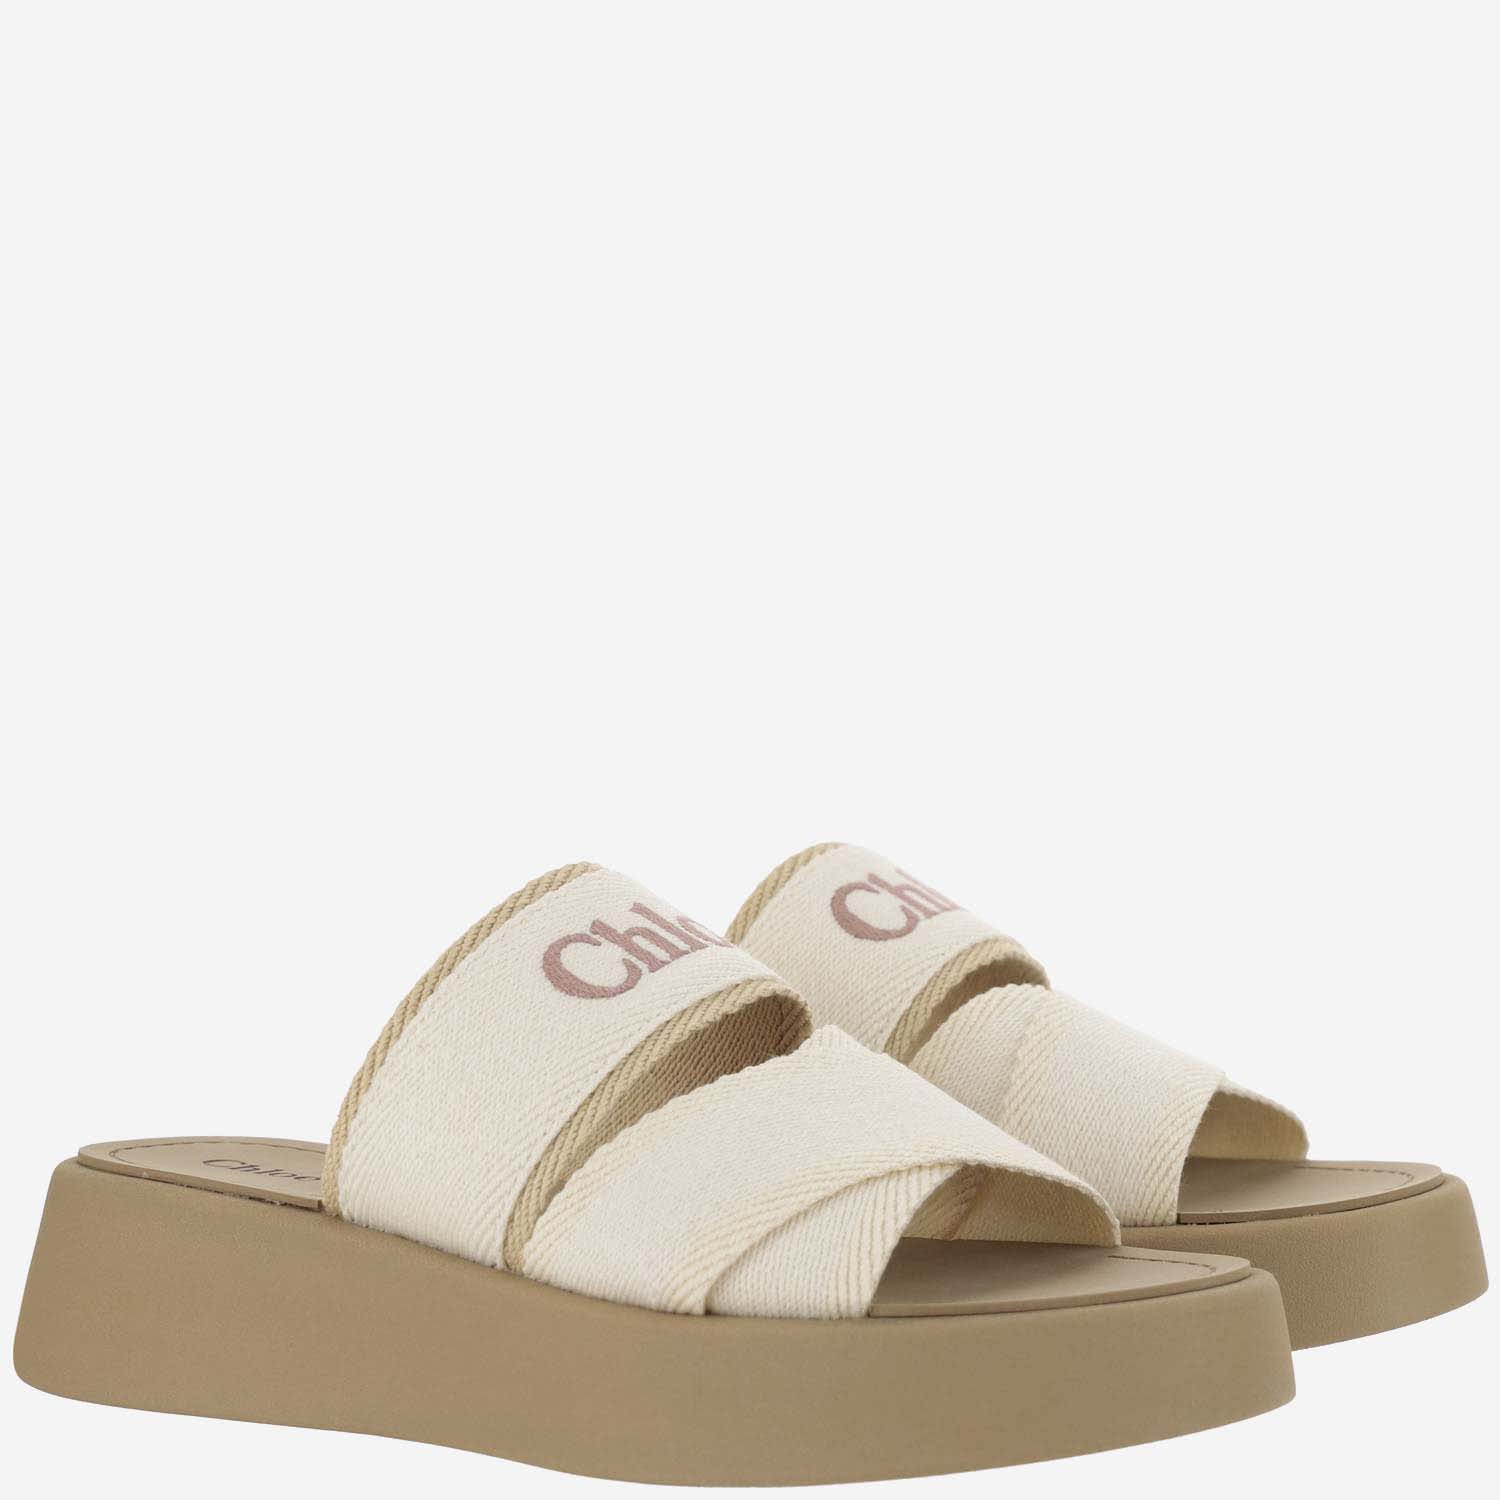 Shop Chloé Canvas Sandals With Logo In Beige/white